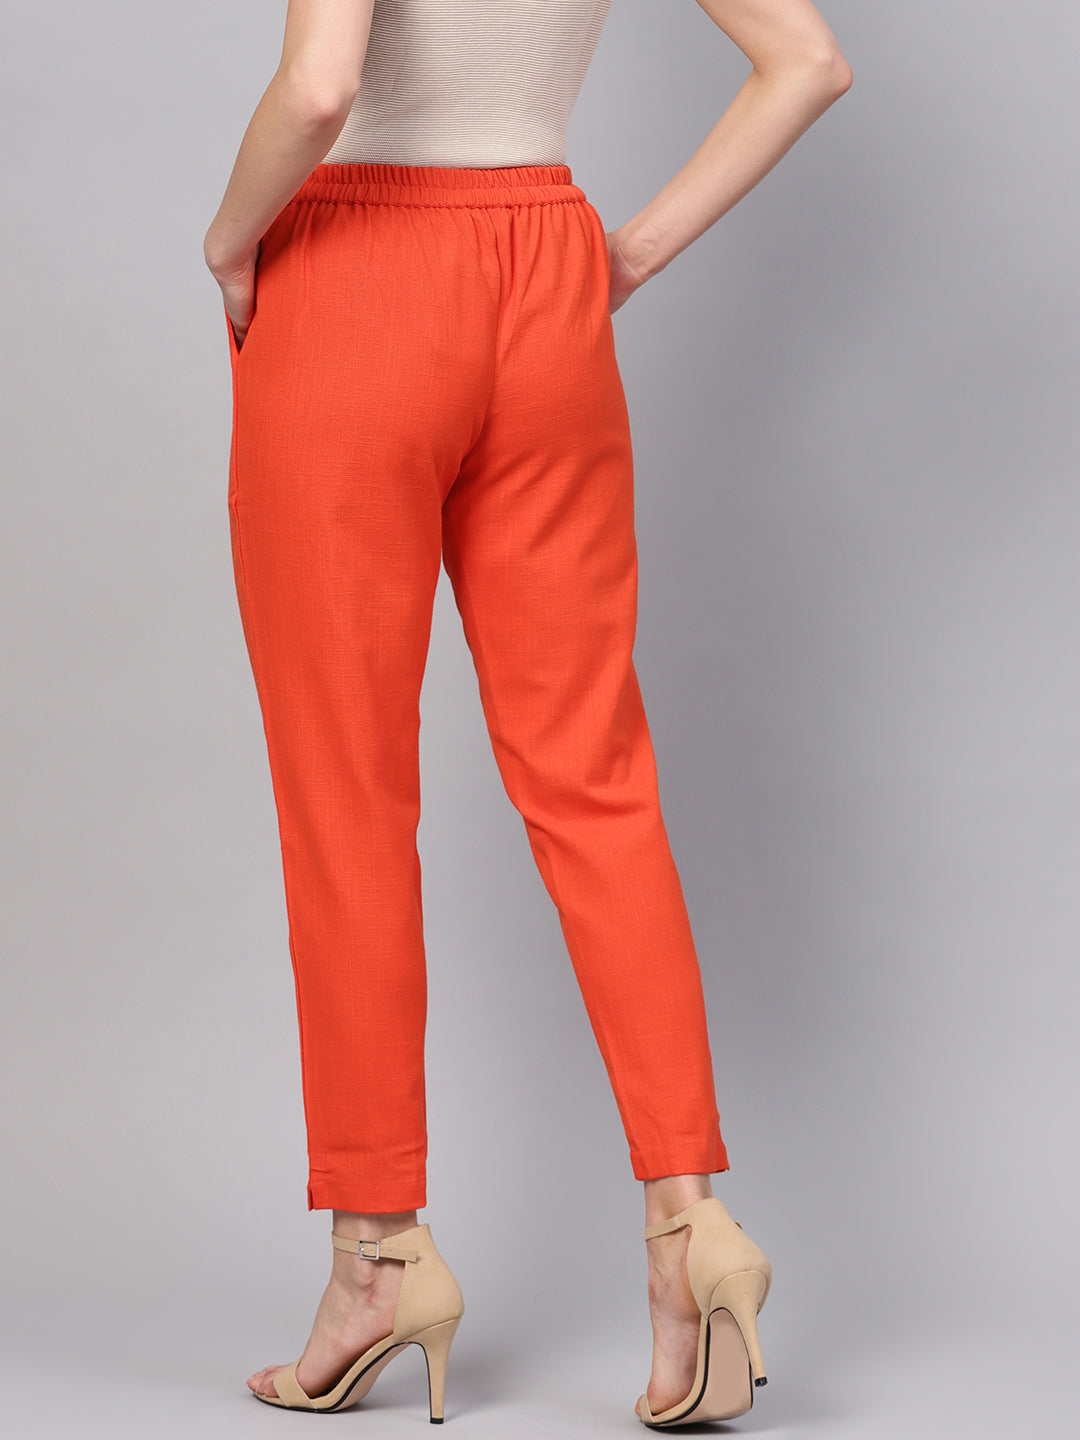 Buy ankle Length Pants for Women